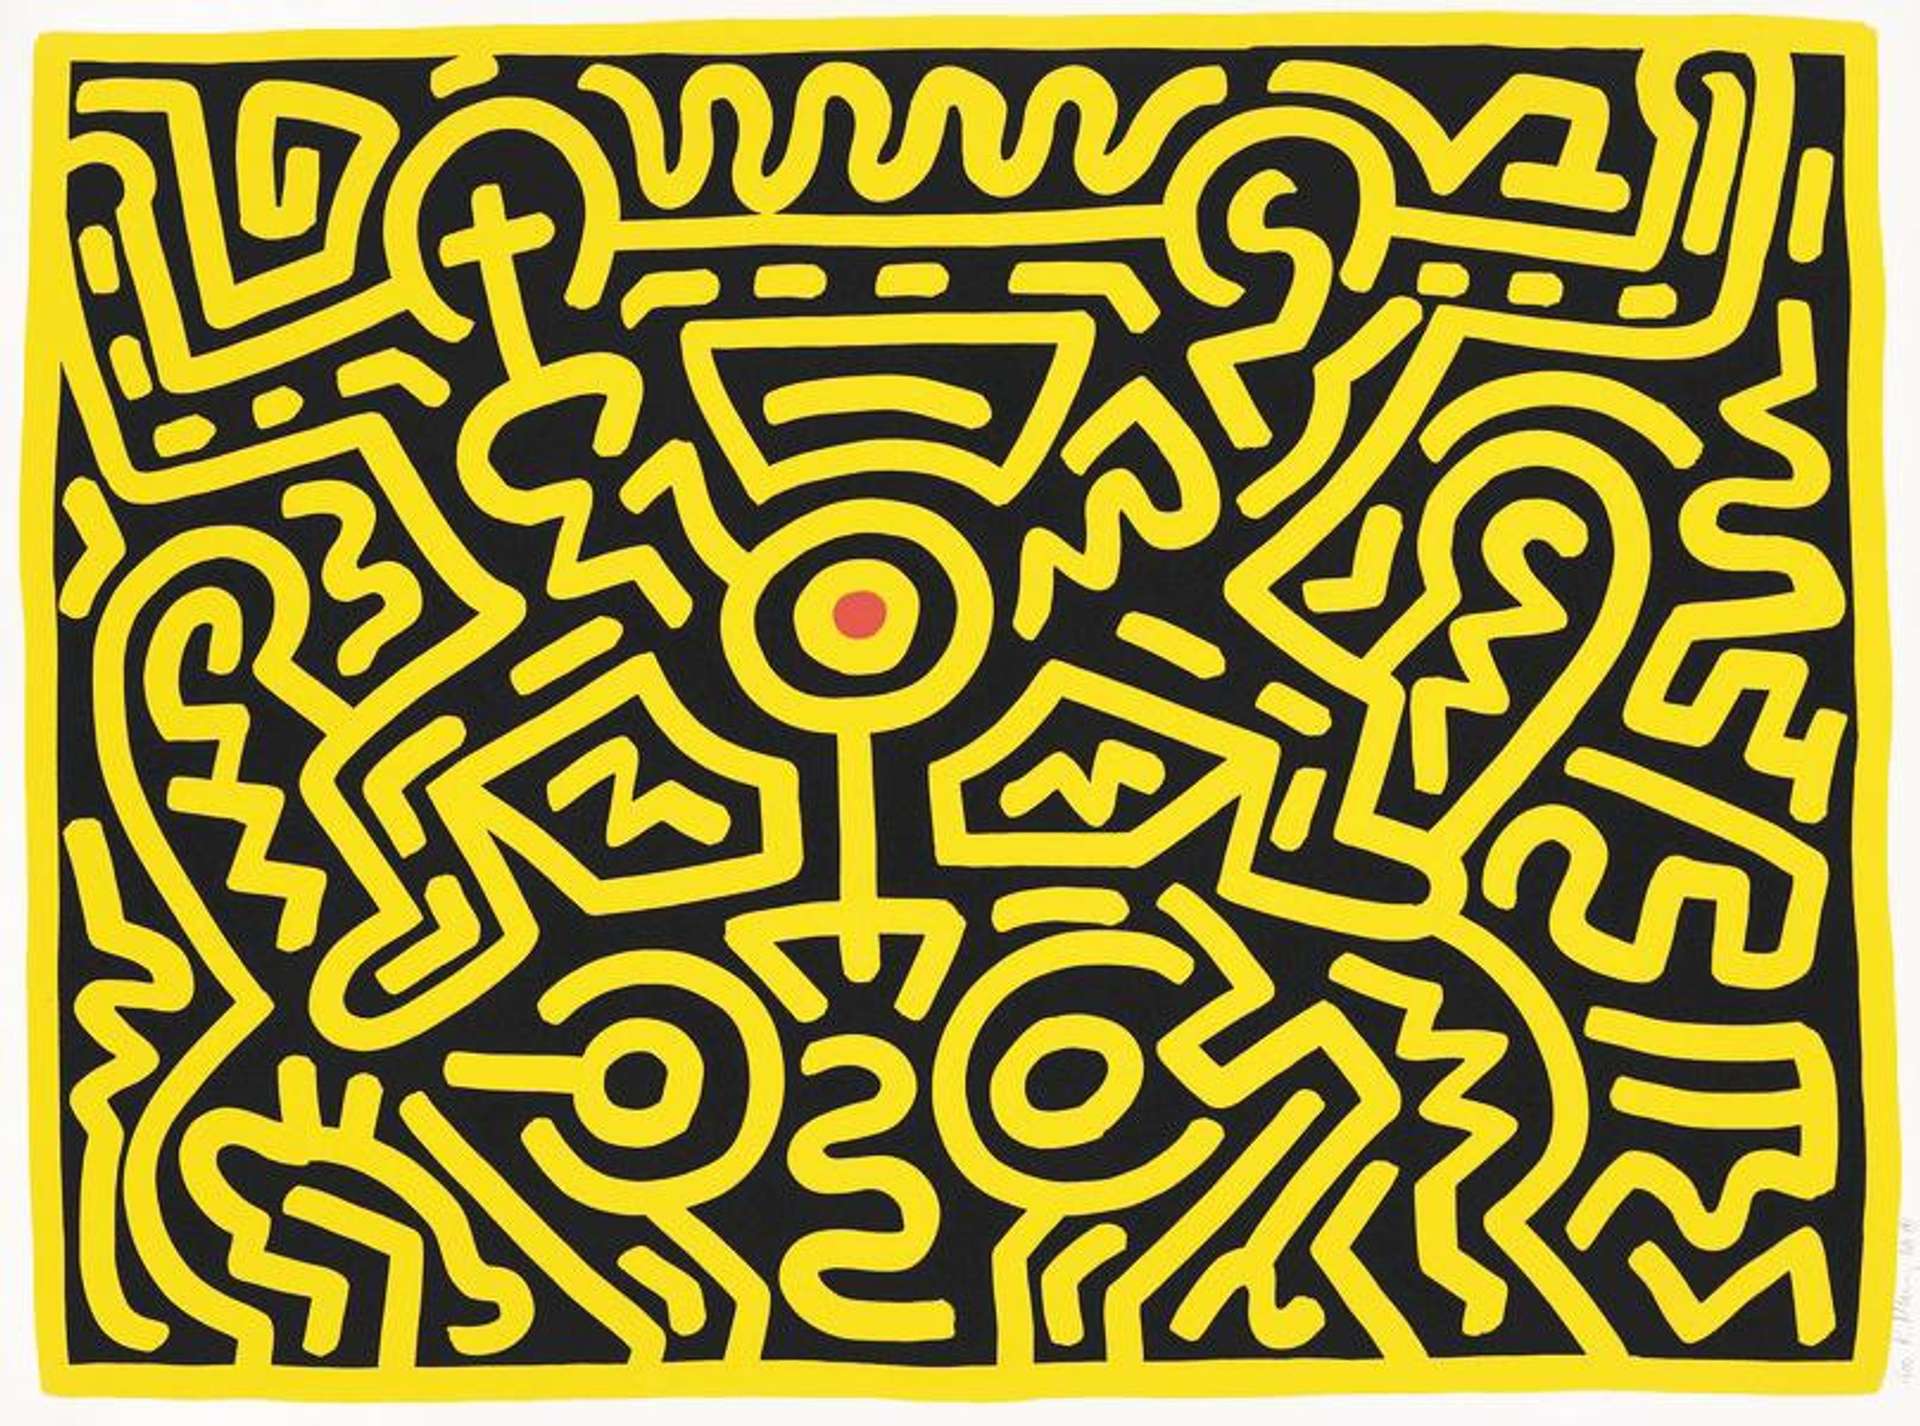 Keith Haring’s Growing 3. A Pop Art screenprint of a pattern of yellow lines and figures against a black background with one red polka dot in the centre.Keith Haring’s Growing 3. A Pop Art screenprint of a pattern of yellow lines and figures against a black background with one red polka dot in the centre.